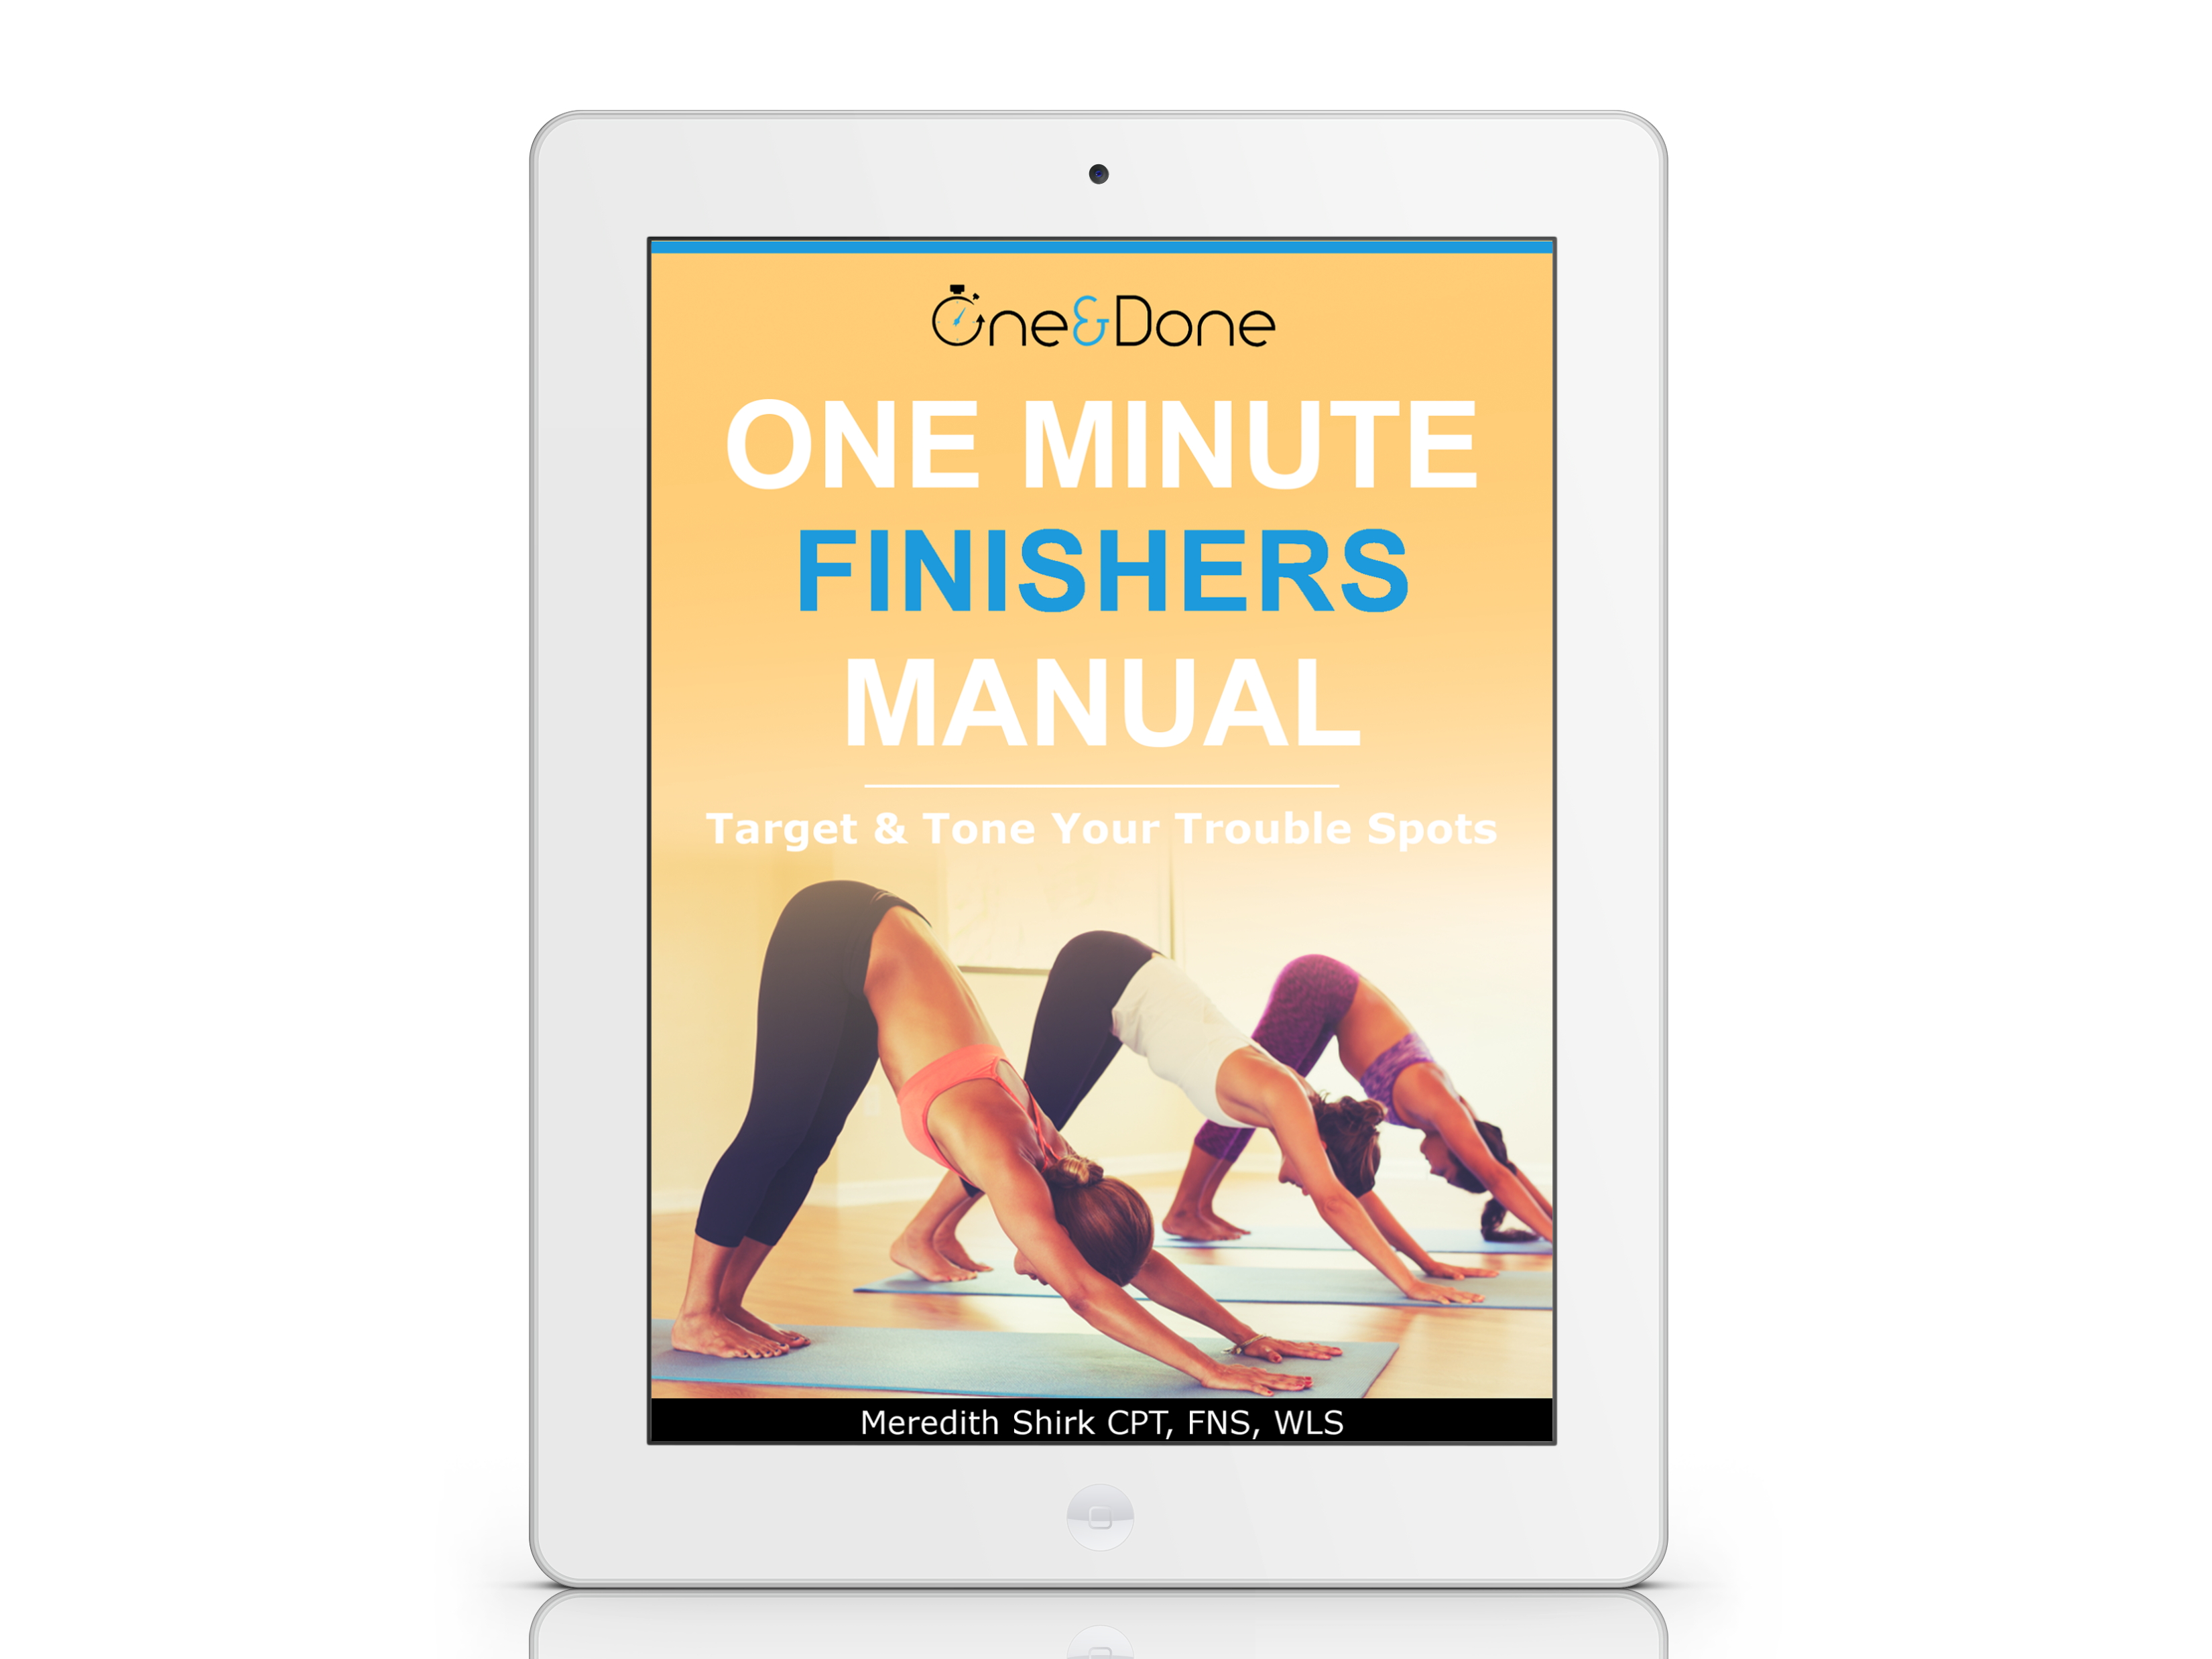 One Minute Finishers Manual